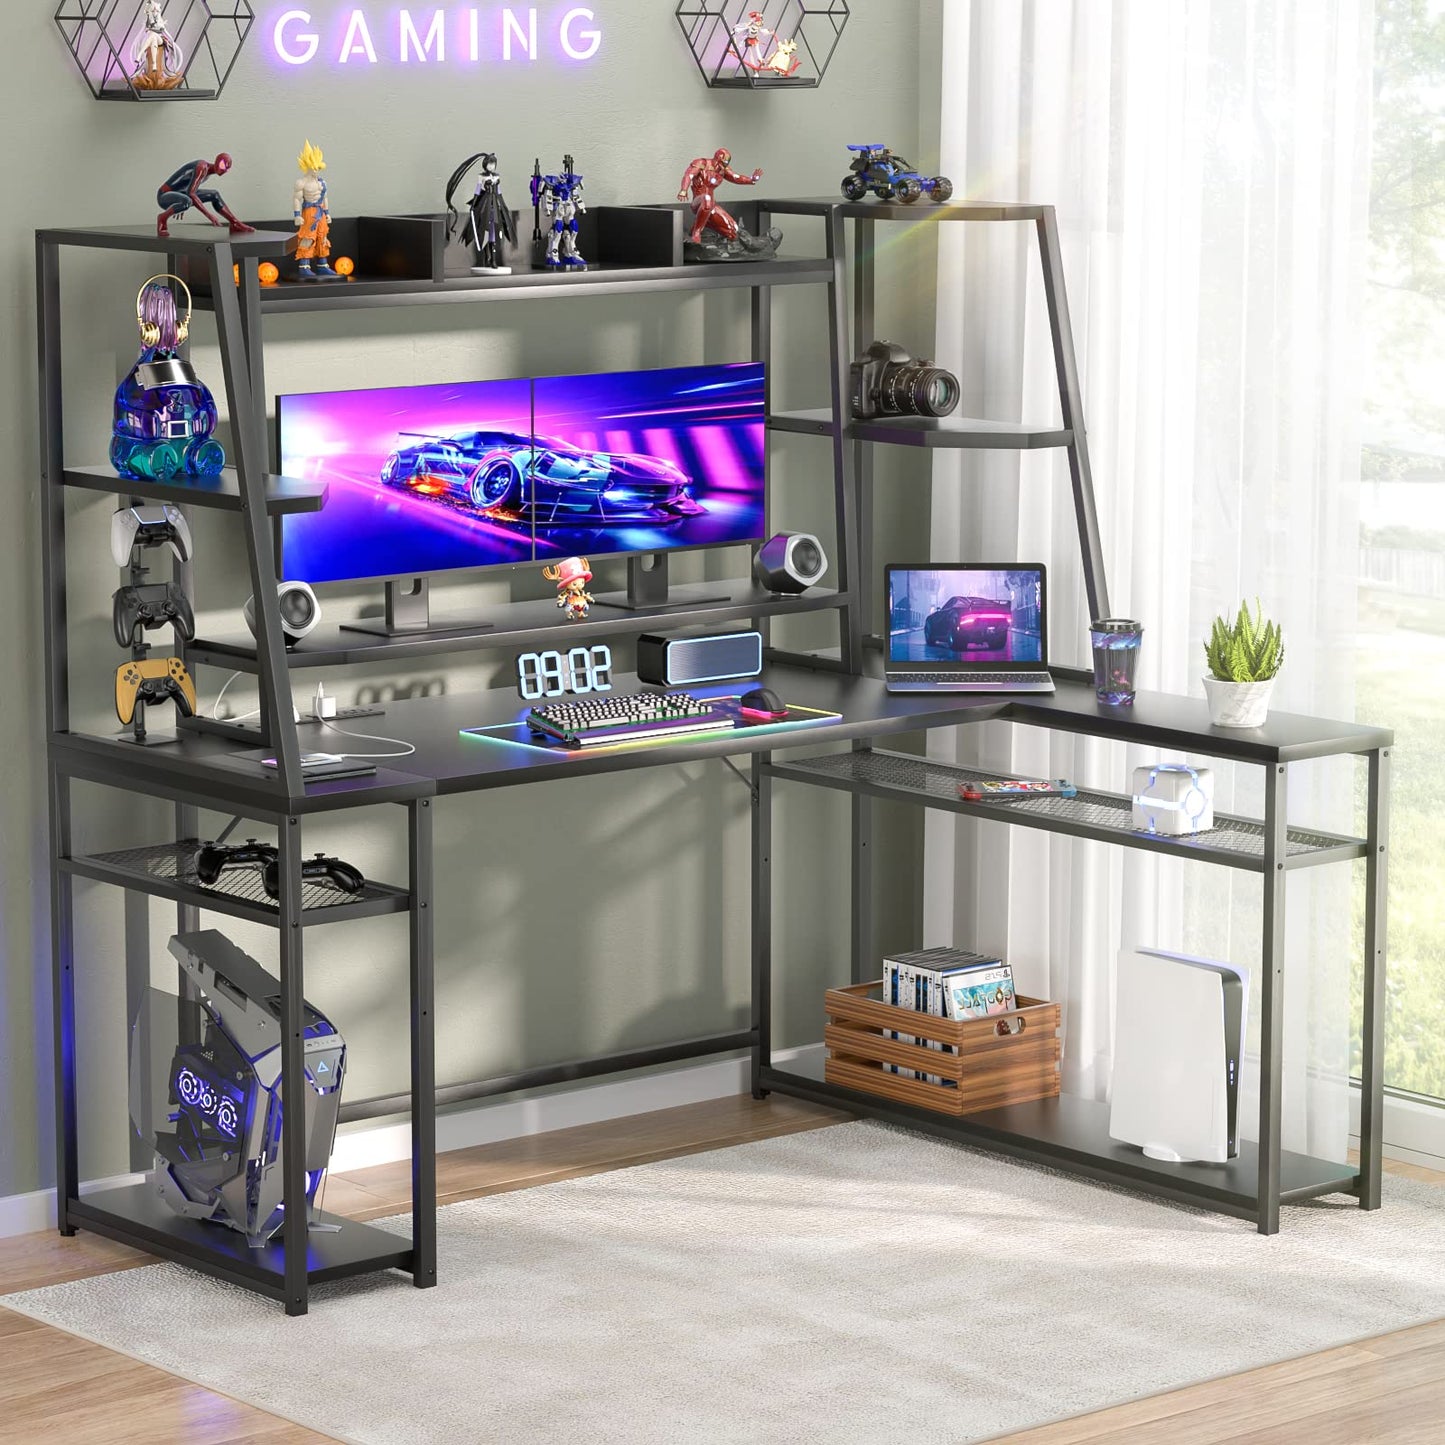 armocity 63'' L Shaped Gaming Desk with LED Lights & Power Strips, Reversible Gaming Table Desk with Hutch, L-Shaped PC Gaming Desk with Storage Shelves, L Desk for Gaming with Monitor Stand, Black